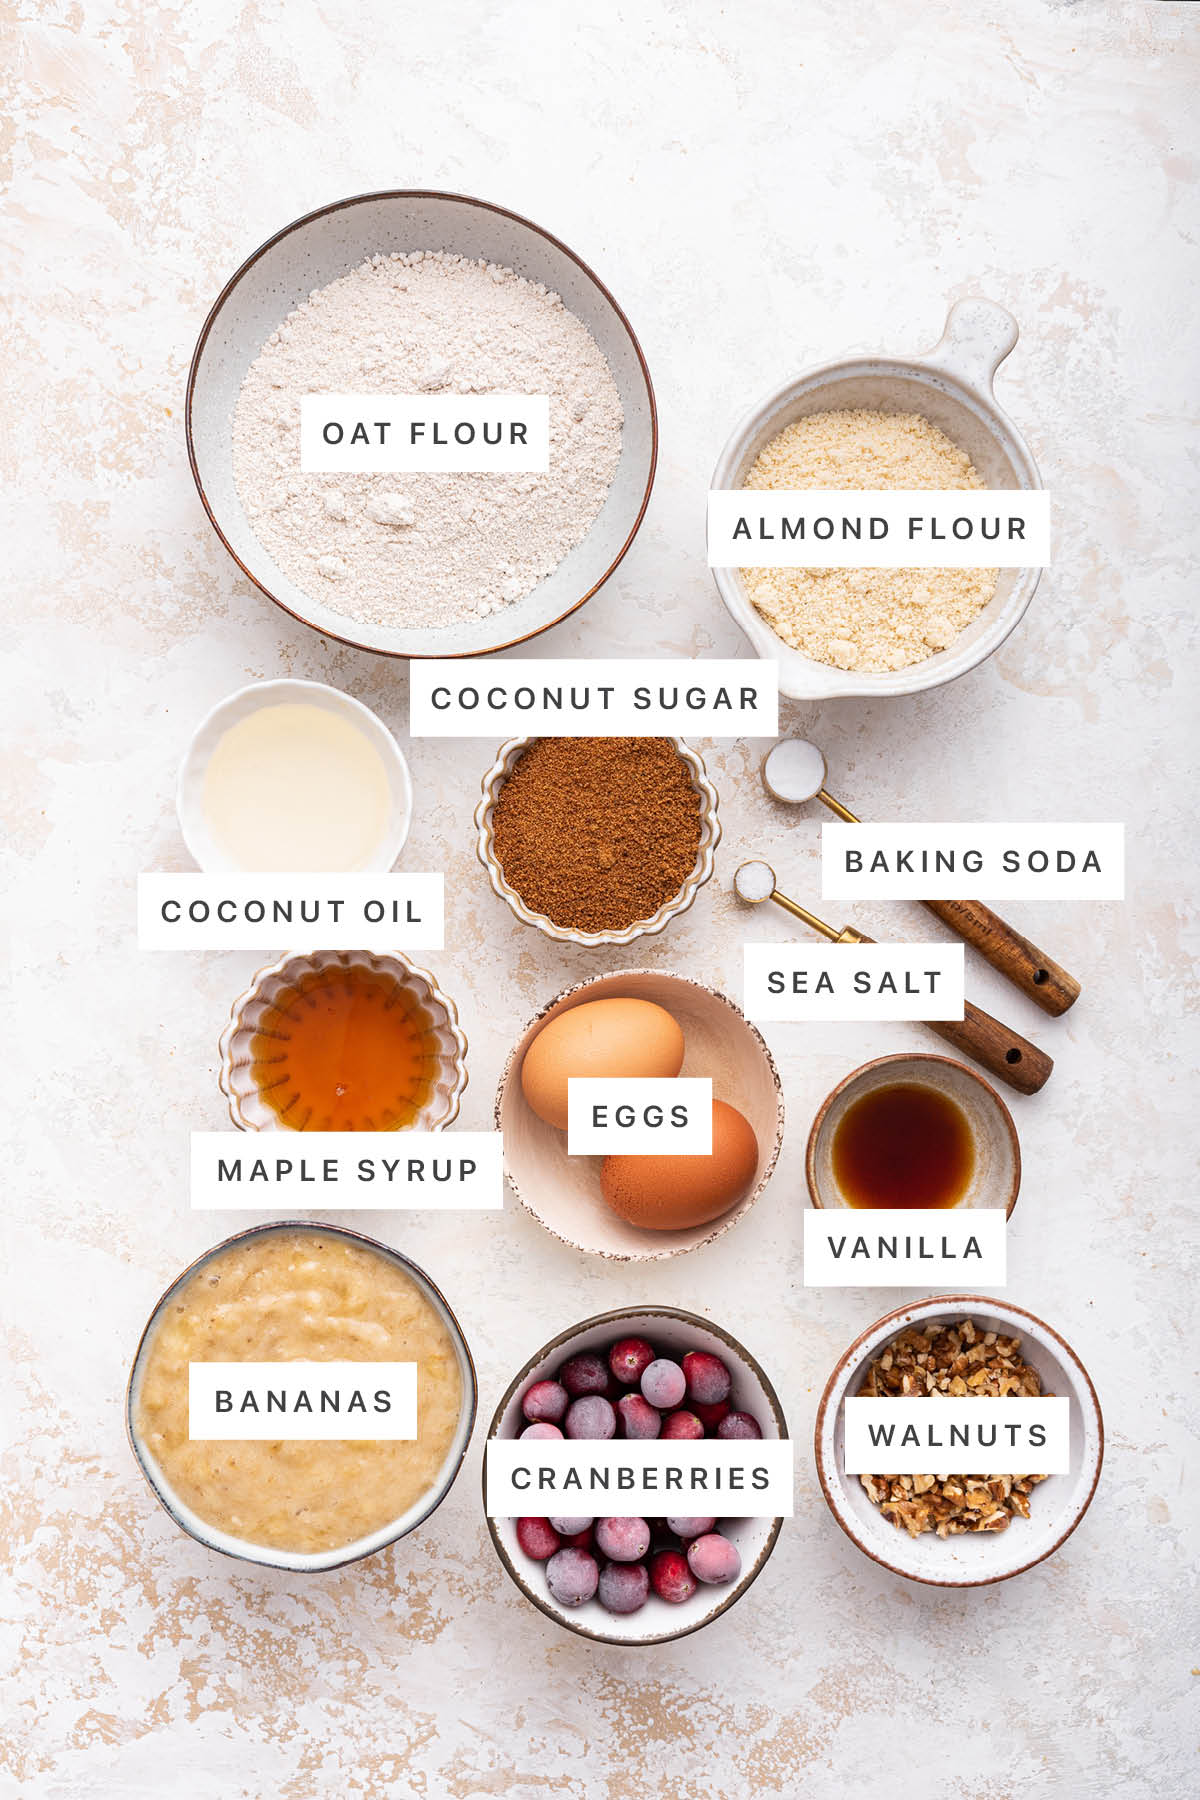 Ingredients measured out to make Cranberry Banana Bread: oat flour, almond flour, coconut sugar, coconut oil, baking soda, sea salt, maple syrup, eggs, vanilla, bananas, cranberries and walnuts.